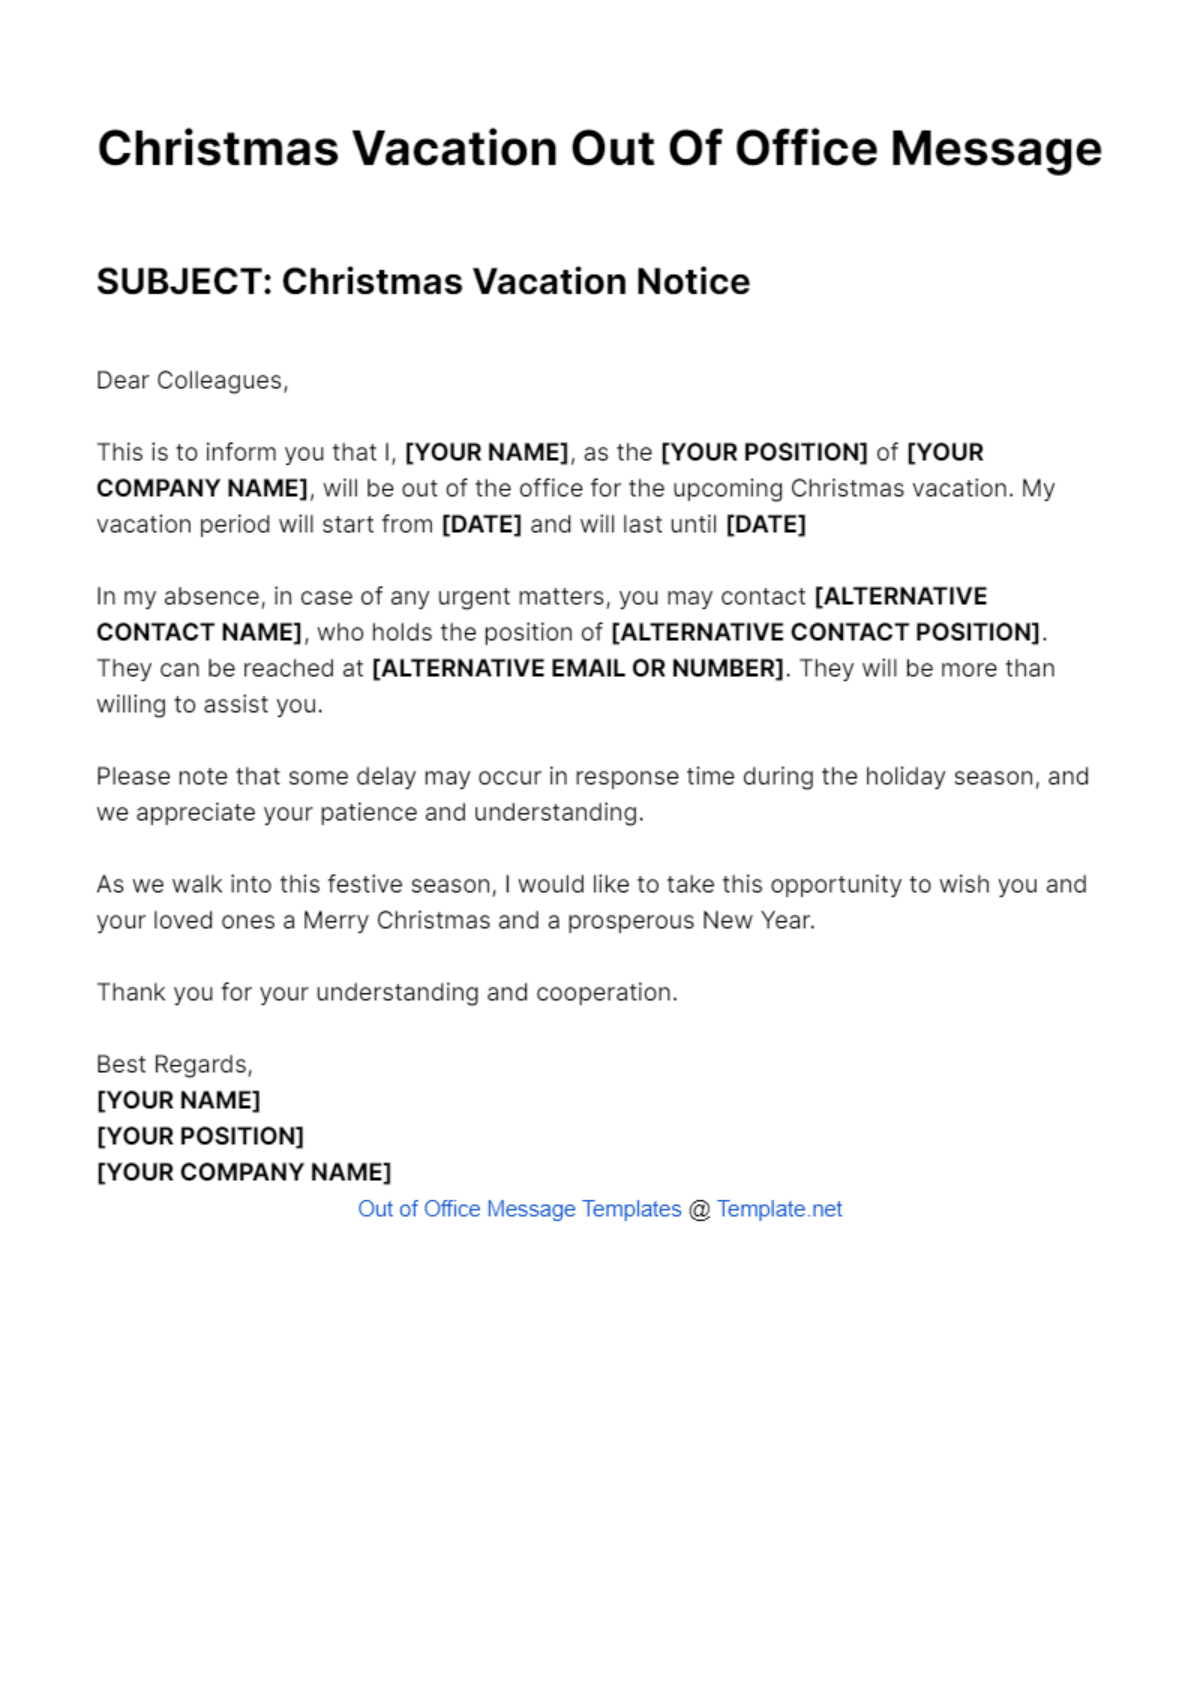 Christmas Vacation Out Of Office Message Template